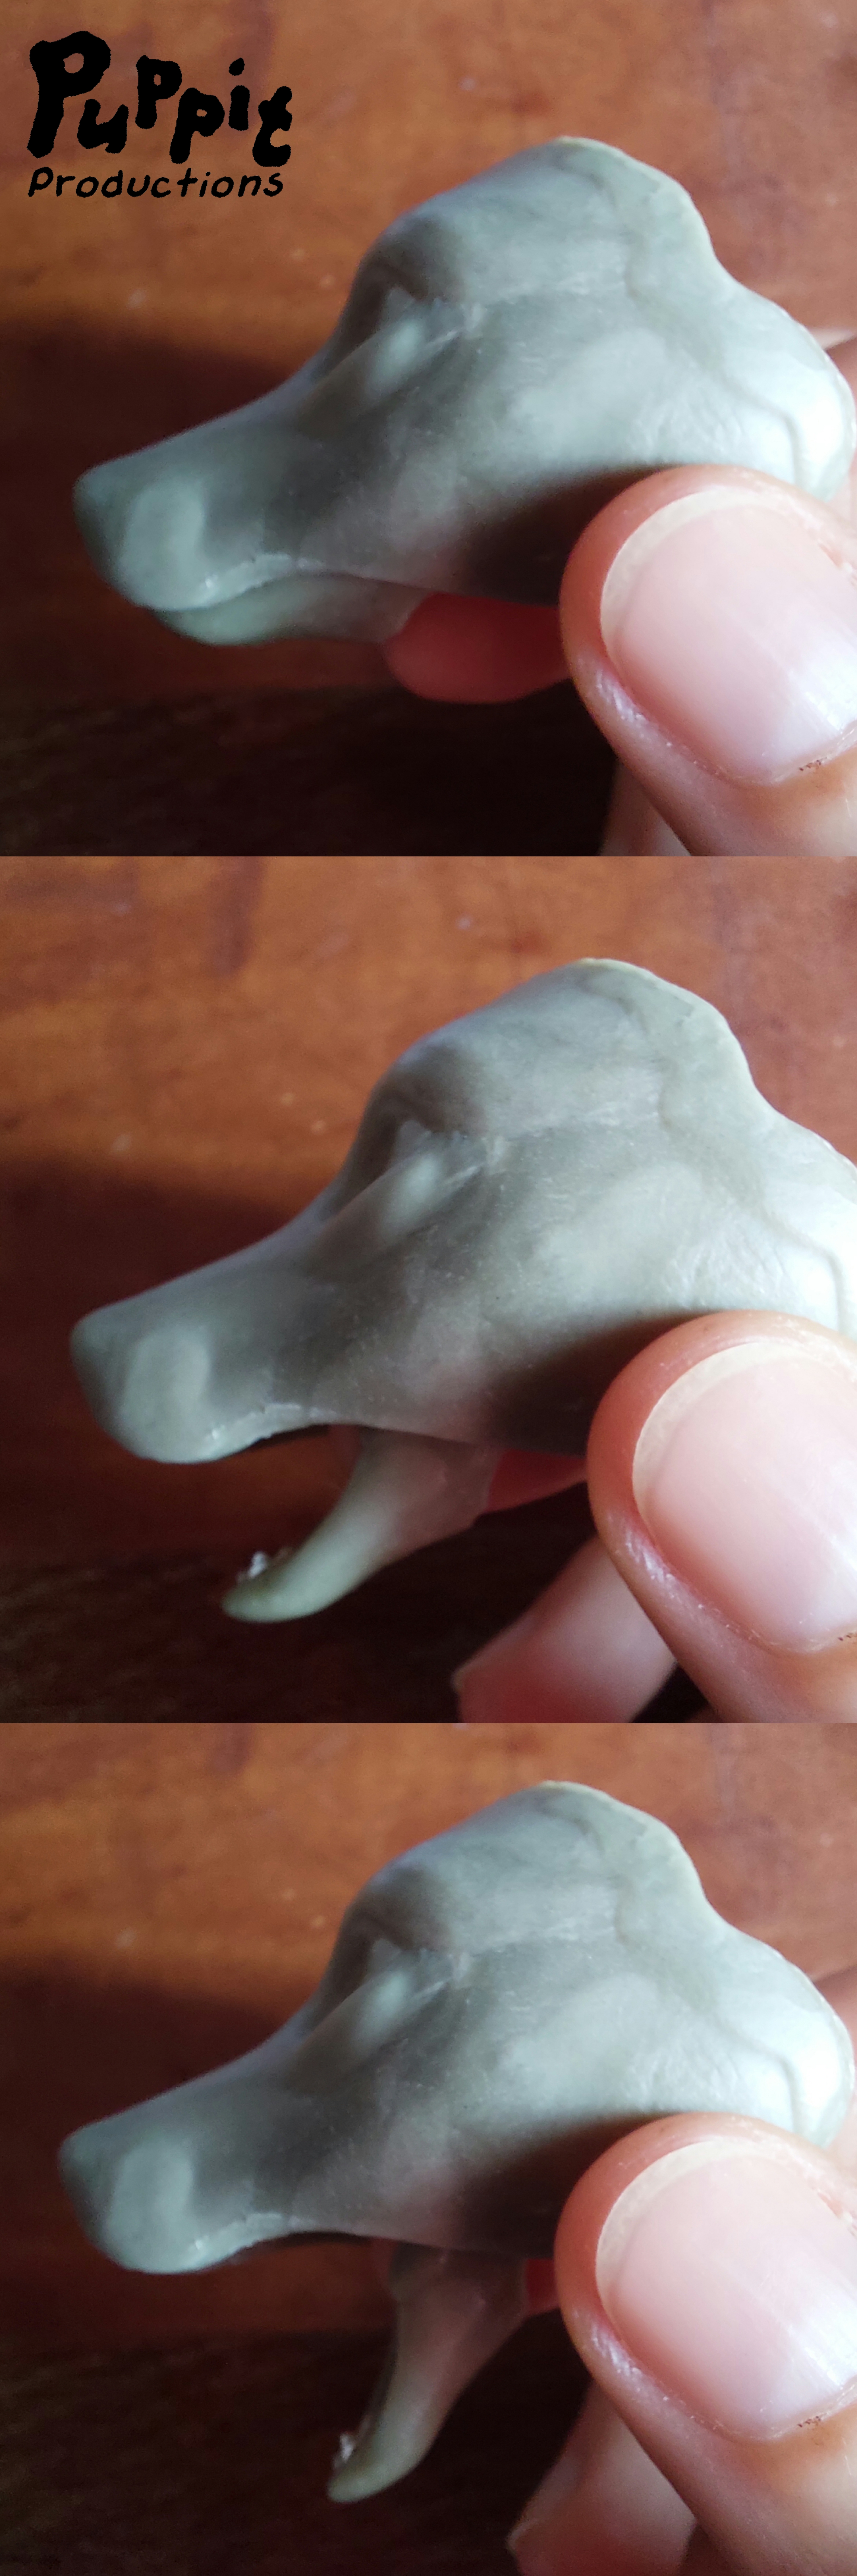 A set of three pictures, showing the face plate of a red wolf doll head in grey clay from the side with the hinged mouth closed, half open and fully opened. The head is not fully sanded yet and shows some marks and scratches.